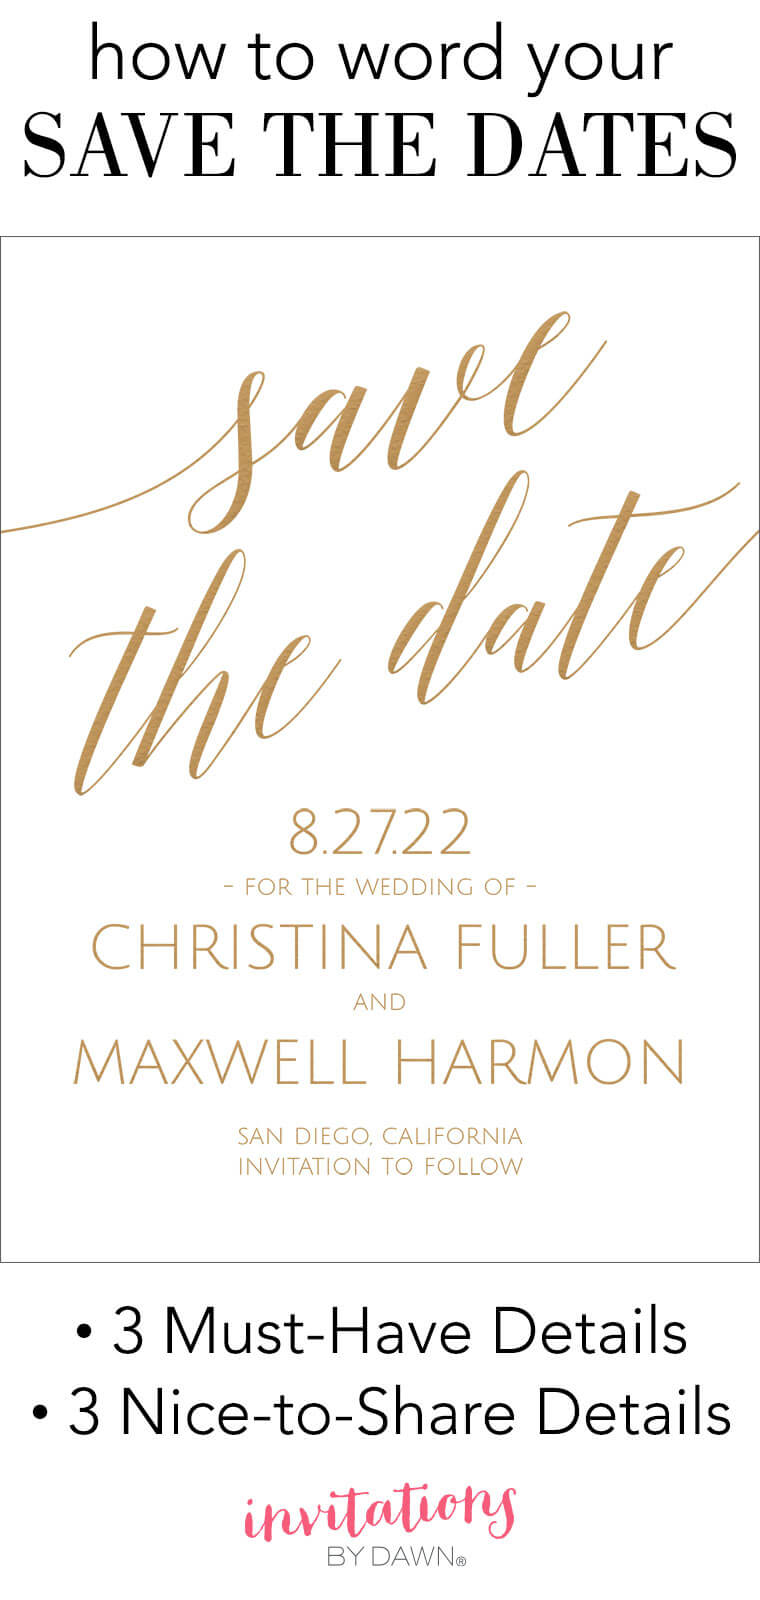 Save The Date Wording | Invitationsdawn With Regard To Save The Date Templates Word